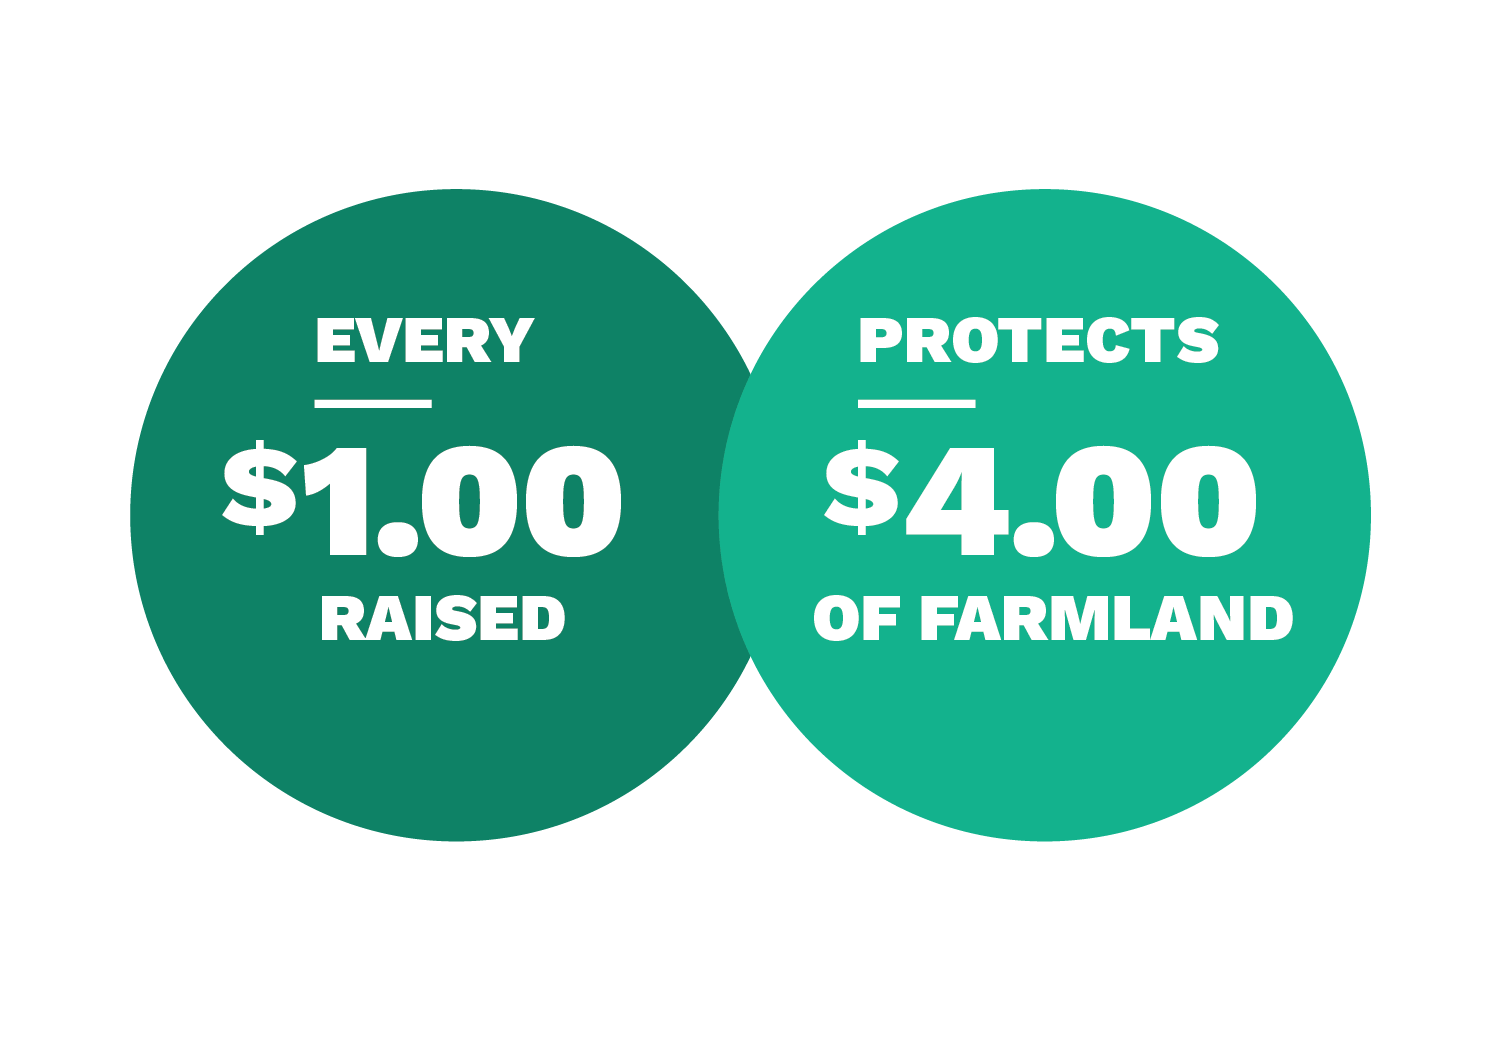 Every $1.00 Raised Protects $4.00 Of Farmland